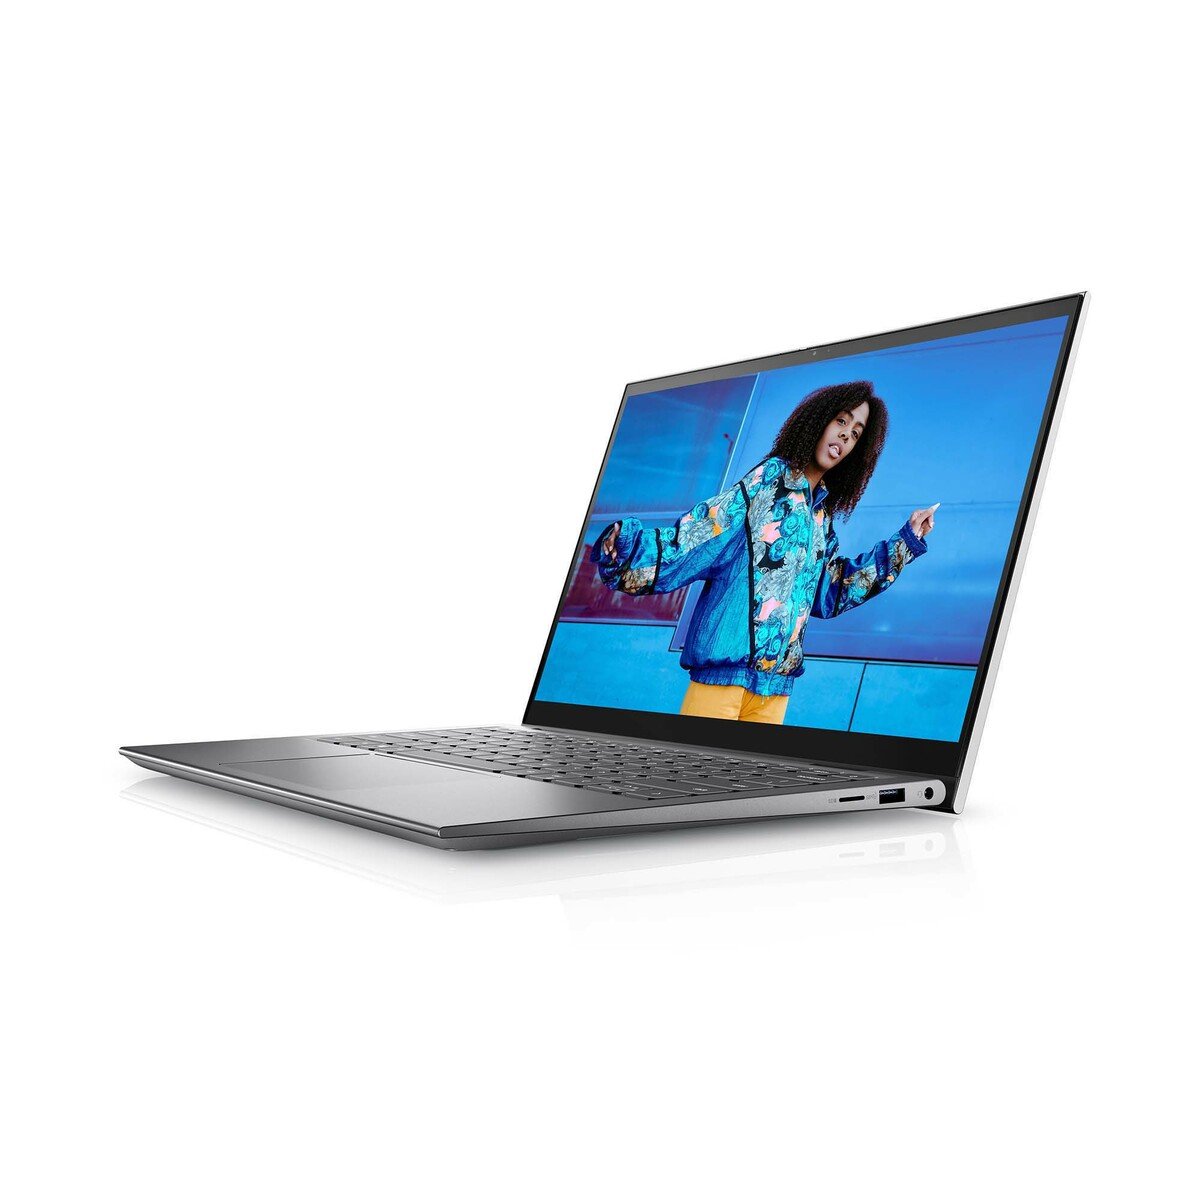 Dell Inspiron 14 2-in-1 Laptop  5410-INS-5044  Intel Core i7 1165G7, 12GB RAM, 512GB SSD, Intel Iris Xe Graphics, 14.0 inch Touch Screen, Windows 10 Home, Silver